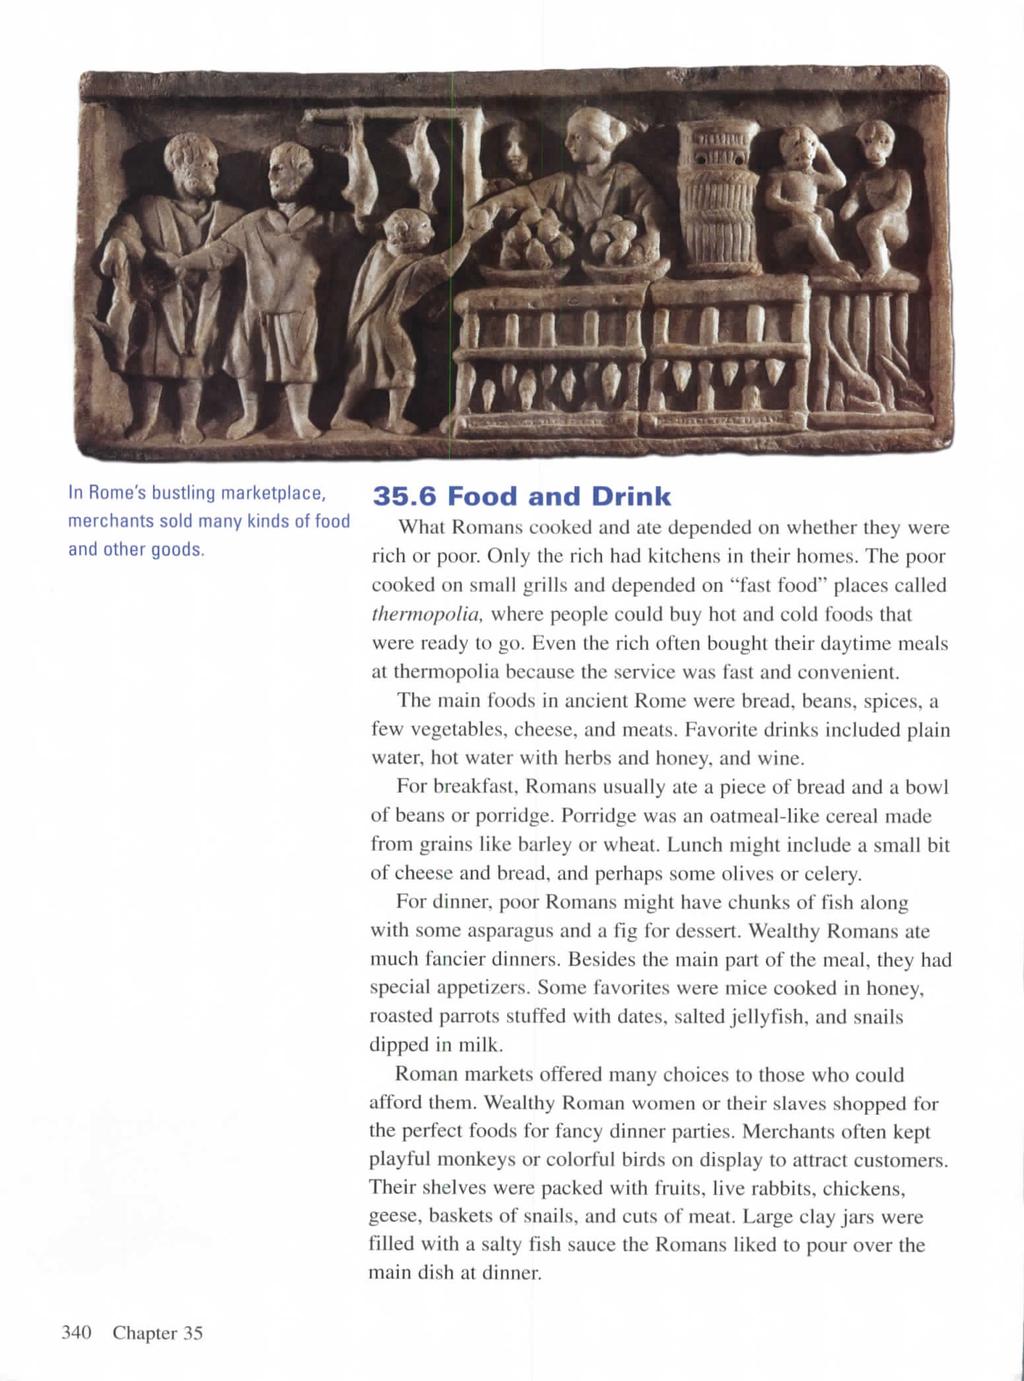 In Rome's bustling marketplace, merchants sold many kinds of food and other goods. 35.6 Food and Drink What Romans cooked and ate depended on whether they were rich or poor.